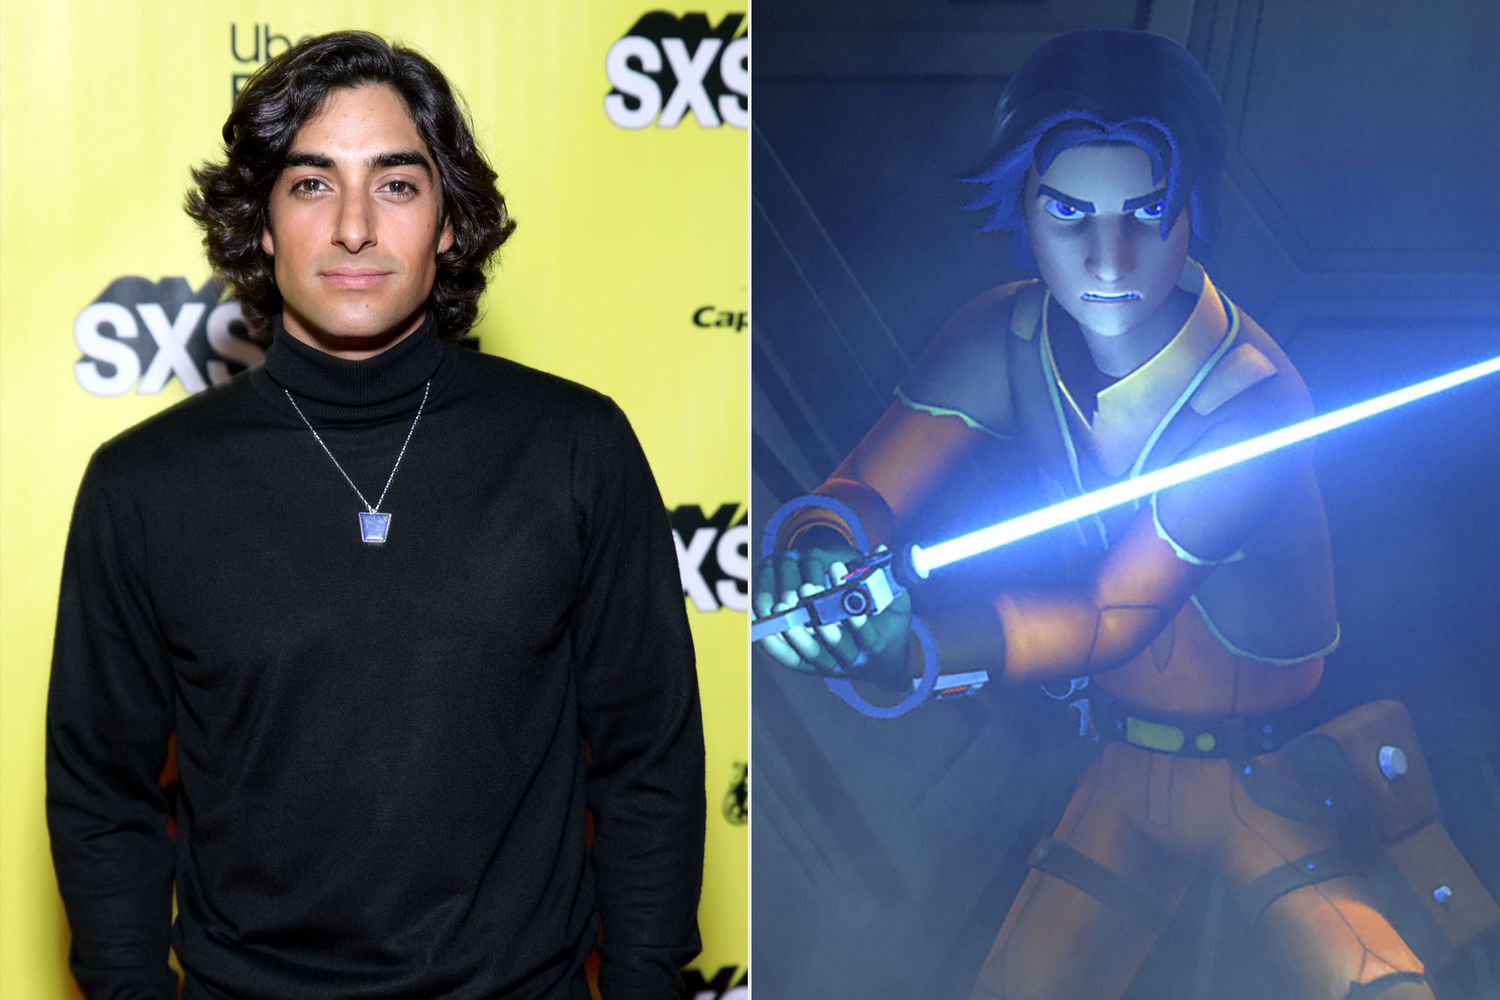 Eman Esfandi attends The Robert Rodriguez Film School and "Red 11" Premiere during the 2019 SXSW Conference and Festivals at Austin Convention Center on March 12, 2019 in Austin, Texas.; Ezra Bridger in Star Wars Rebels